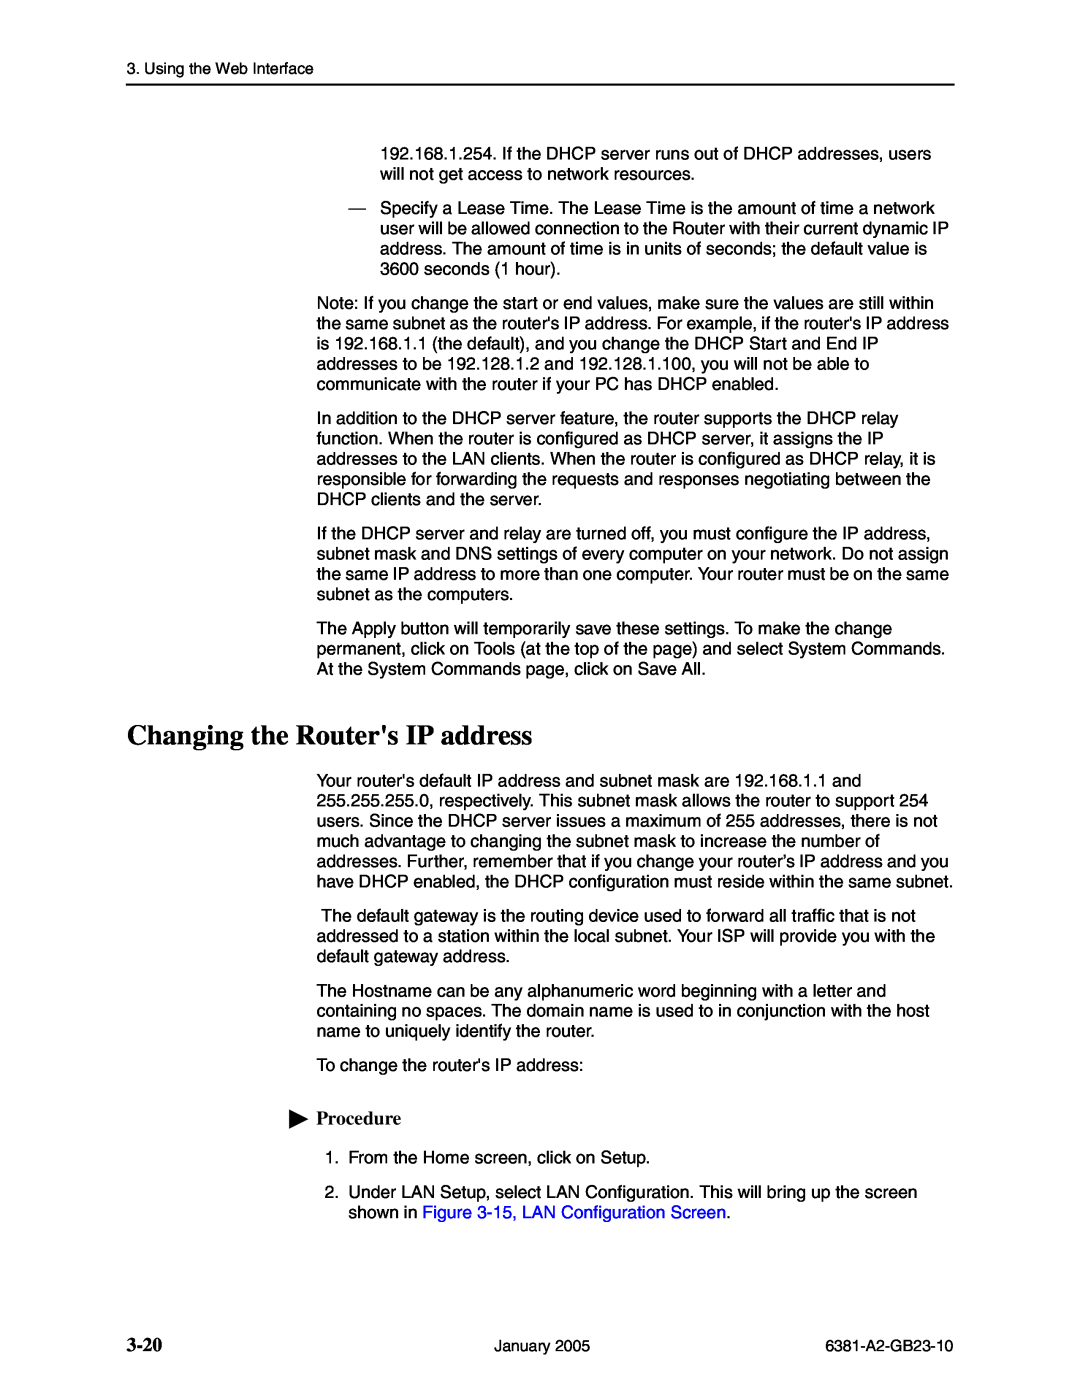 Paradyne 6381-A3 manual Changing the Routers IP address, 3-20, Procedure 